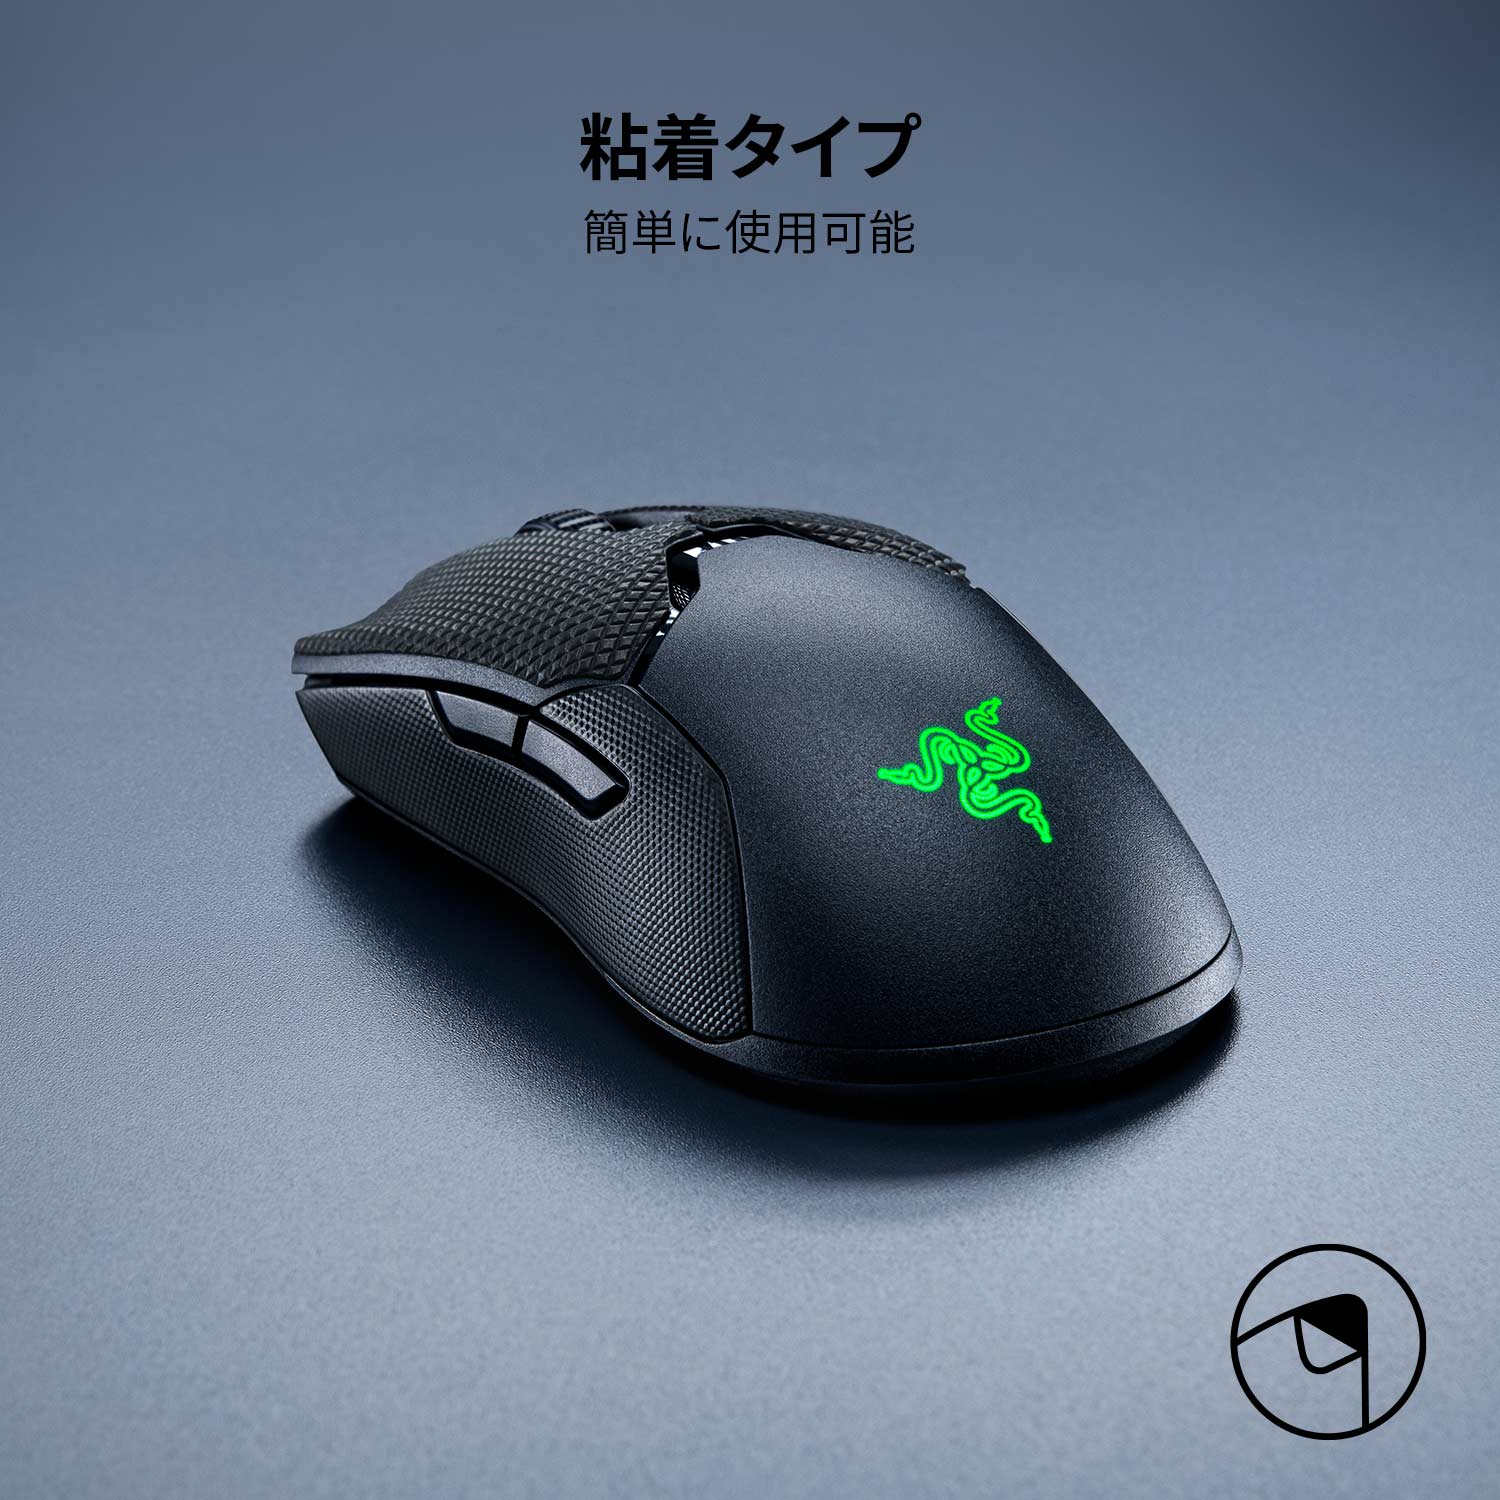 Razer Mouse Grip Tape ( Viper Ultimate/Viper)  マウスグリップテープ （ ヴァイパー アルティメット / ヴァイパー） thumbnail 3